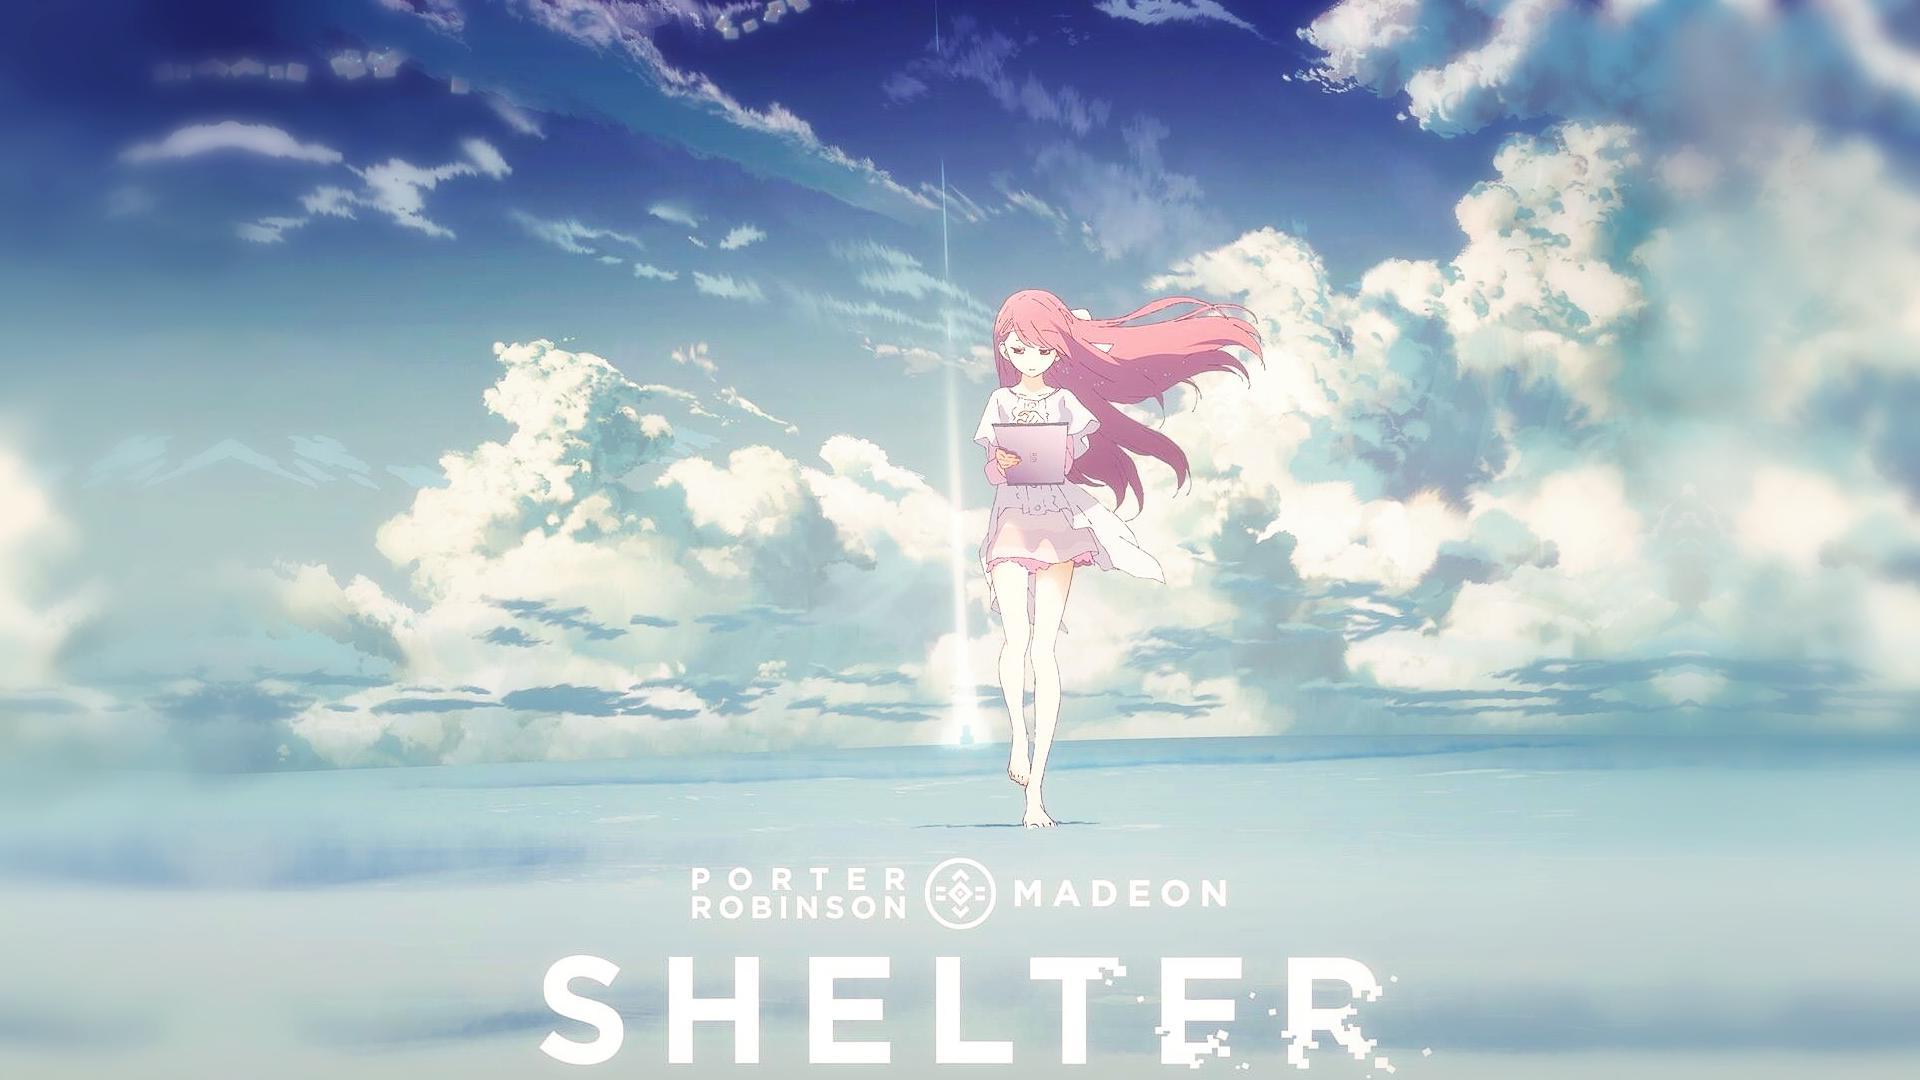 I absolutely loved Shelter and so I made 1080p Wallpaper from